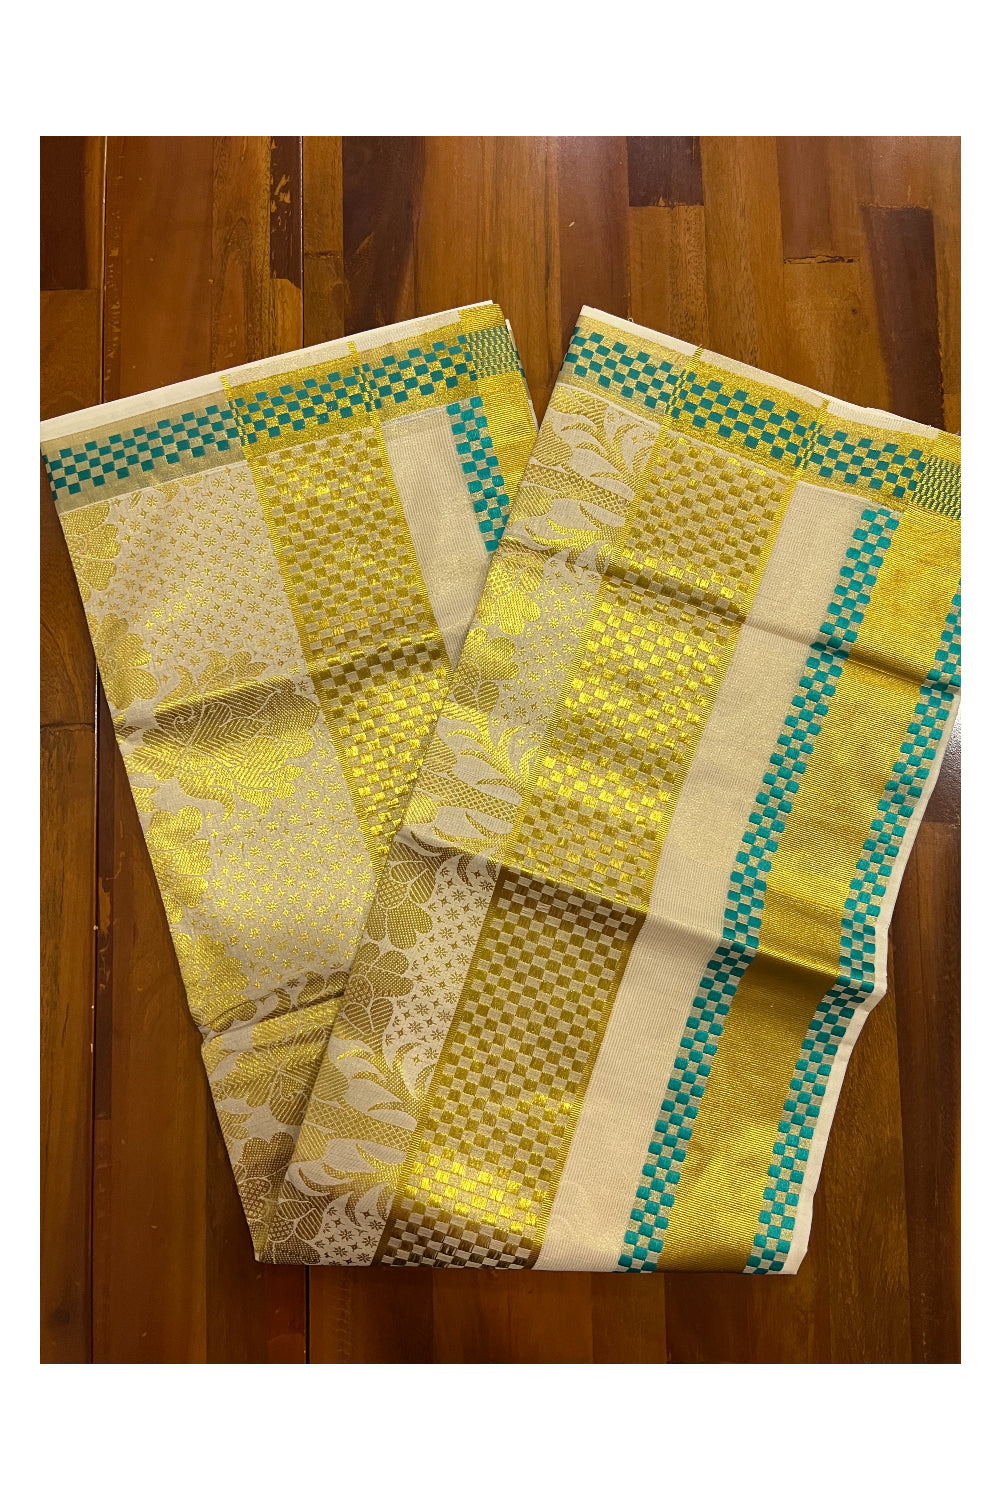 Pure Cotton Kerala Saree with Kasavu Woven Floral Patterns on Body and Turquoise Golden Border